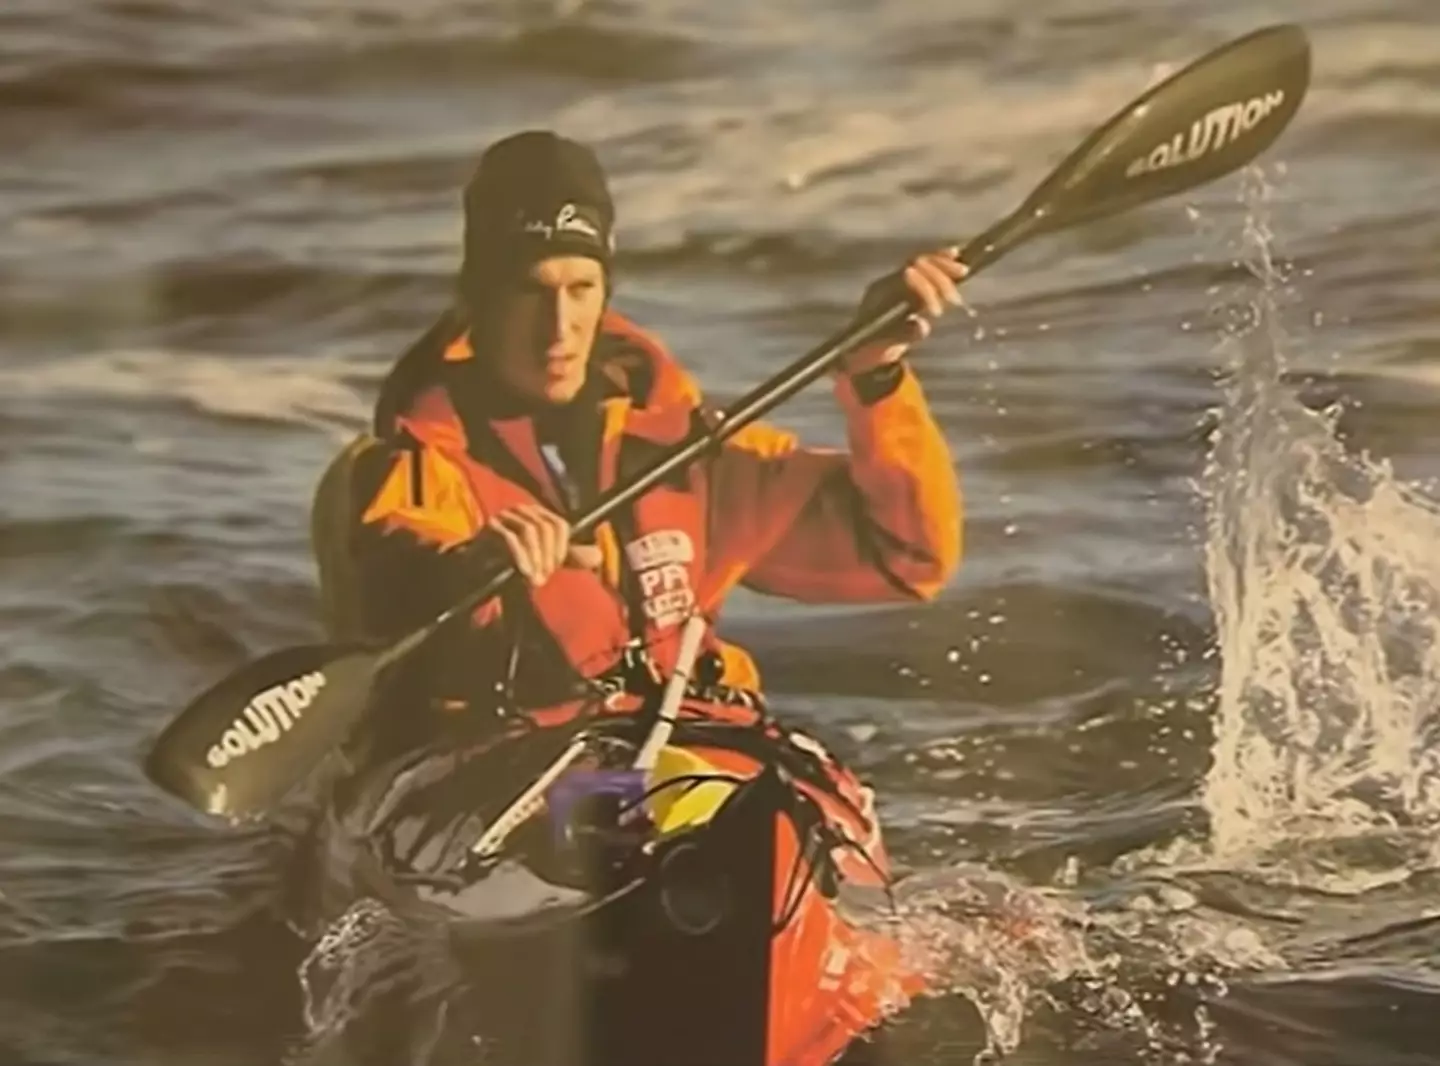 Andrew had completed a number of other voyages across the sea in a kayak. (TV3)